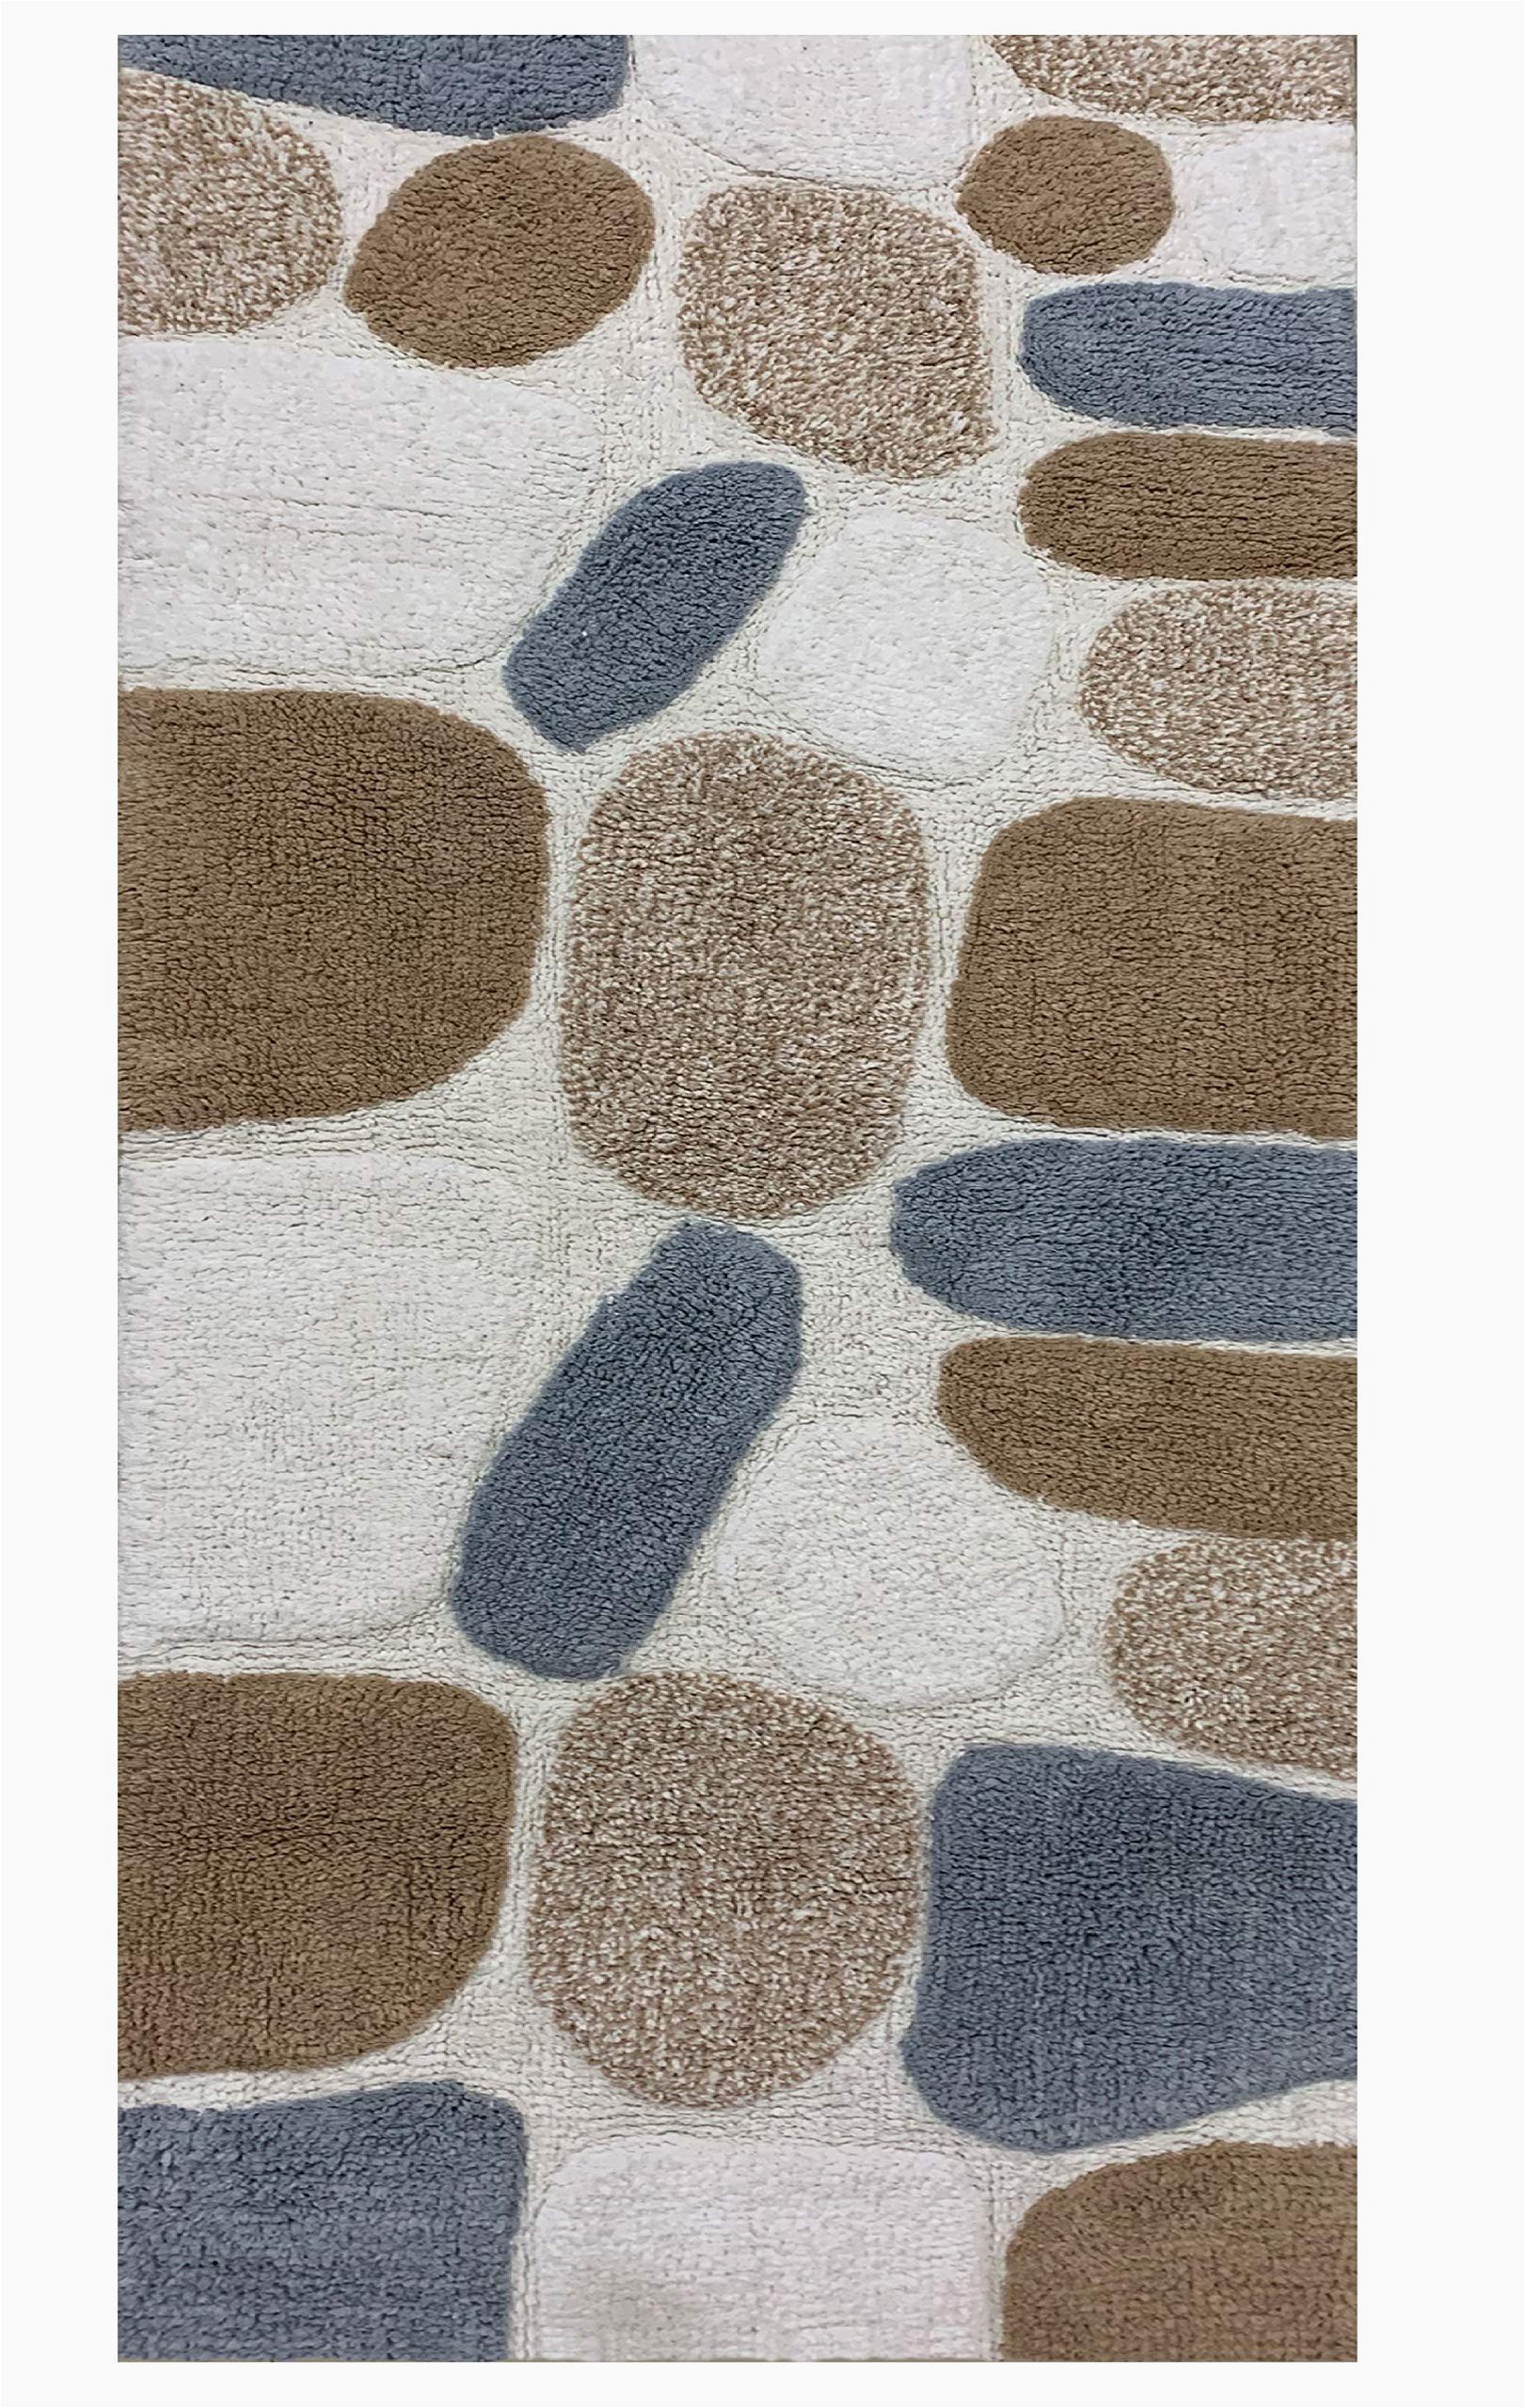 Large Washable Bathroom Rugs Cotton Pebbles Cotton Bath Runner 24×60 Bath Rug soft Absorbent Machine Washable Grey Beige Bath Rugs Runner Rugs Runner for Living